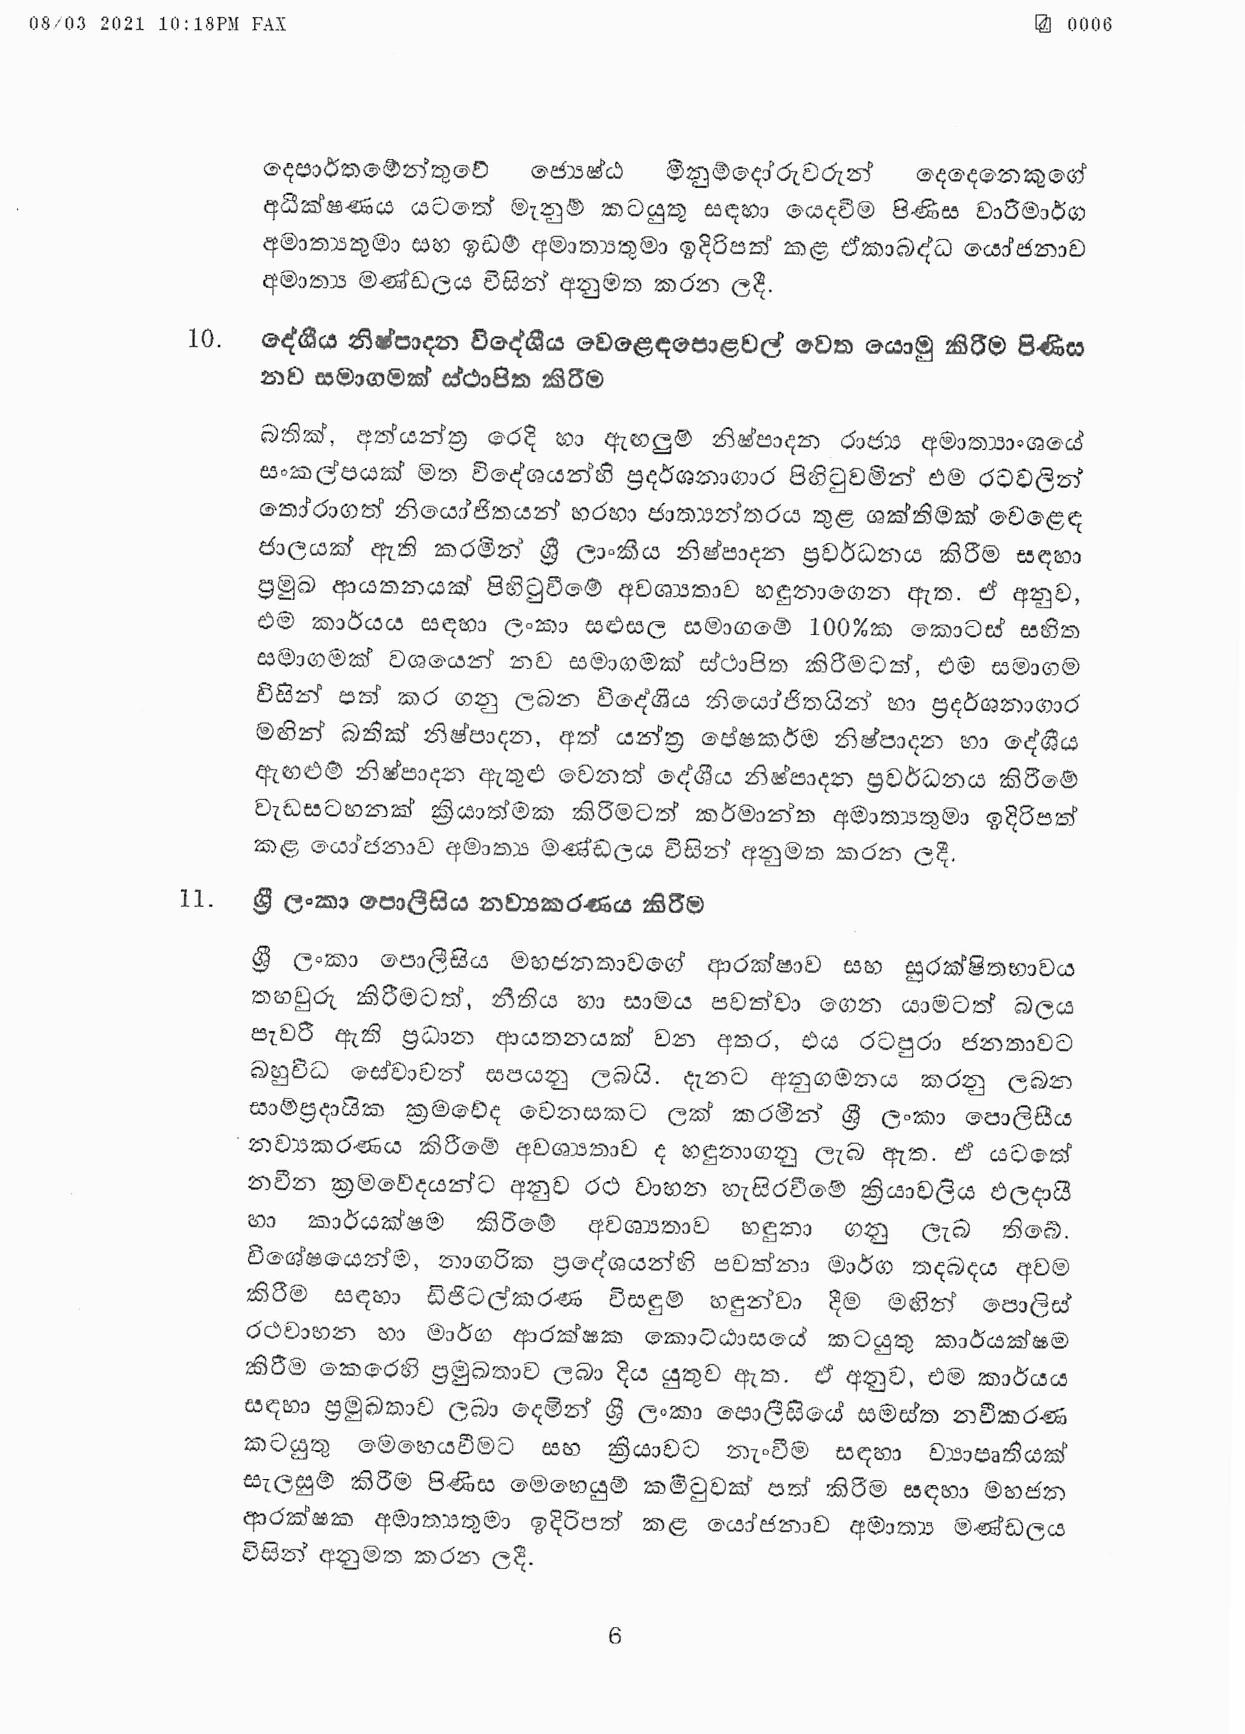 Cabinet Decision on 08.03.2021 page 006